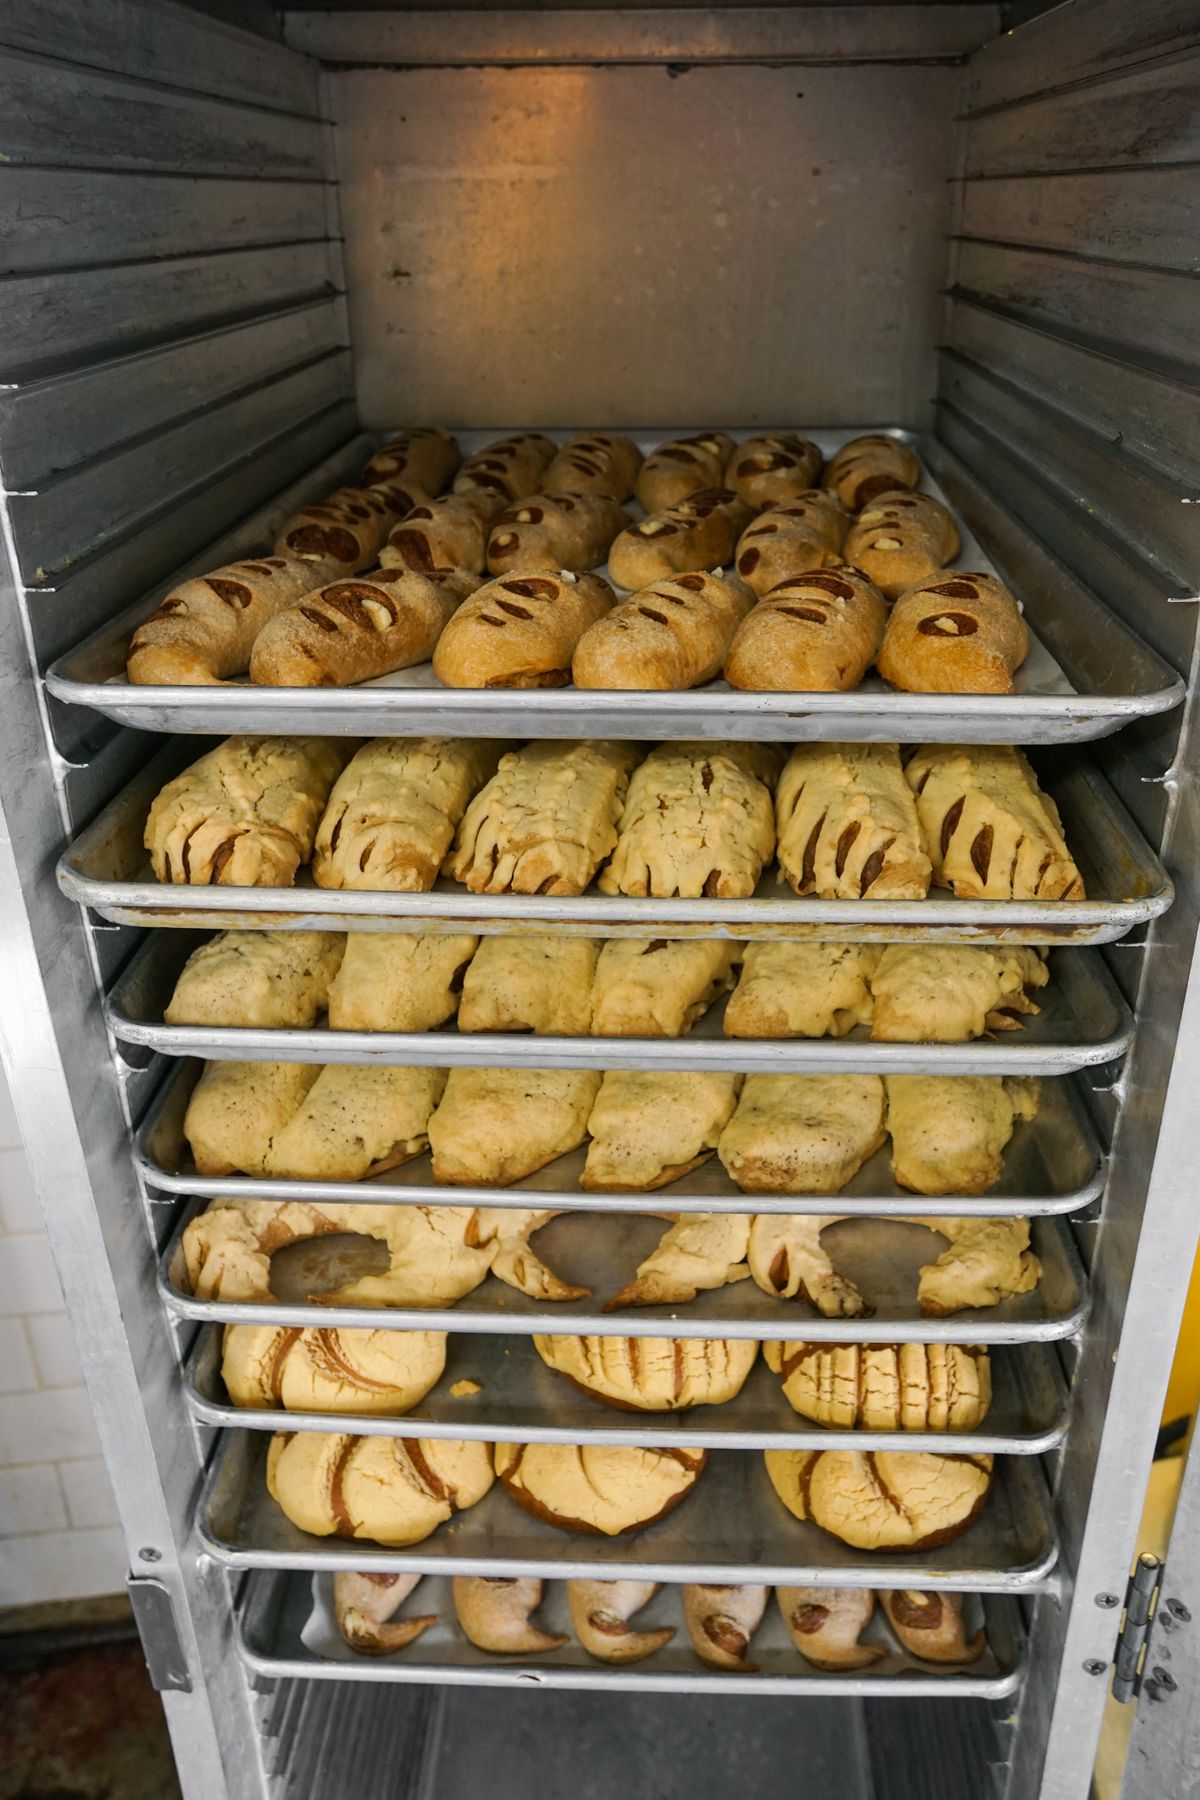 Pan dulces cooling after baking in the ovens at Pan Estilo Copala.